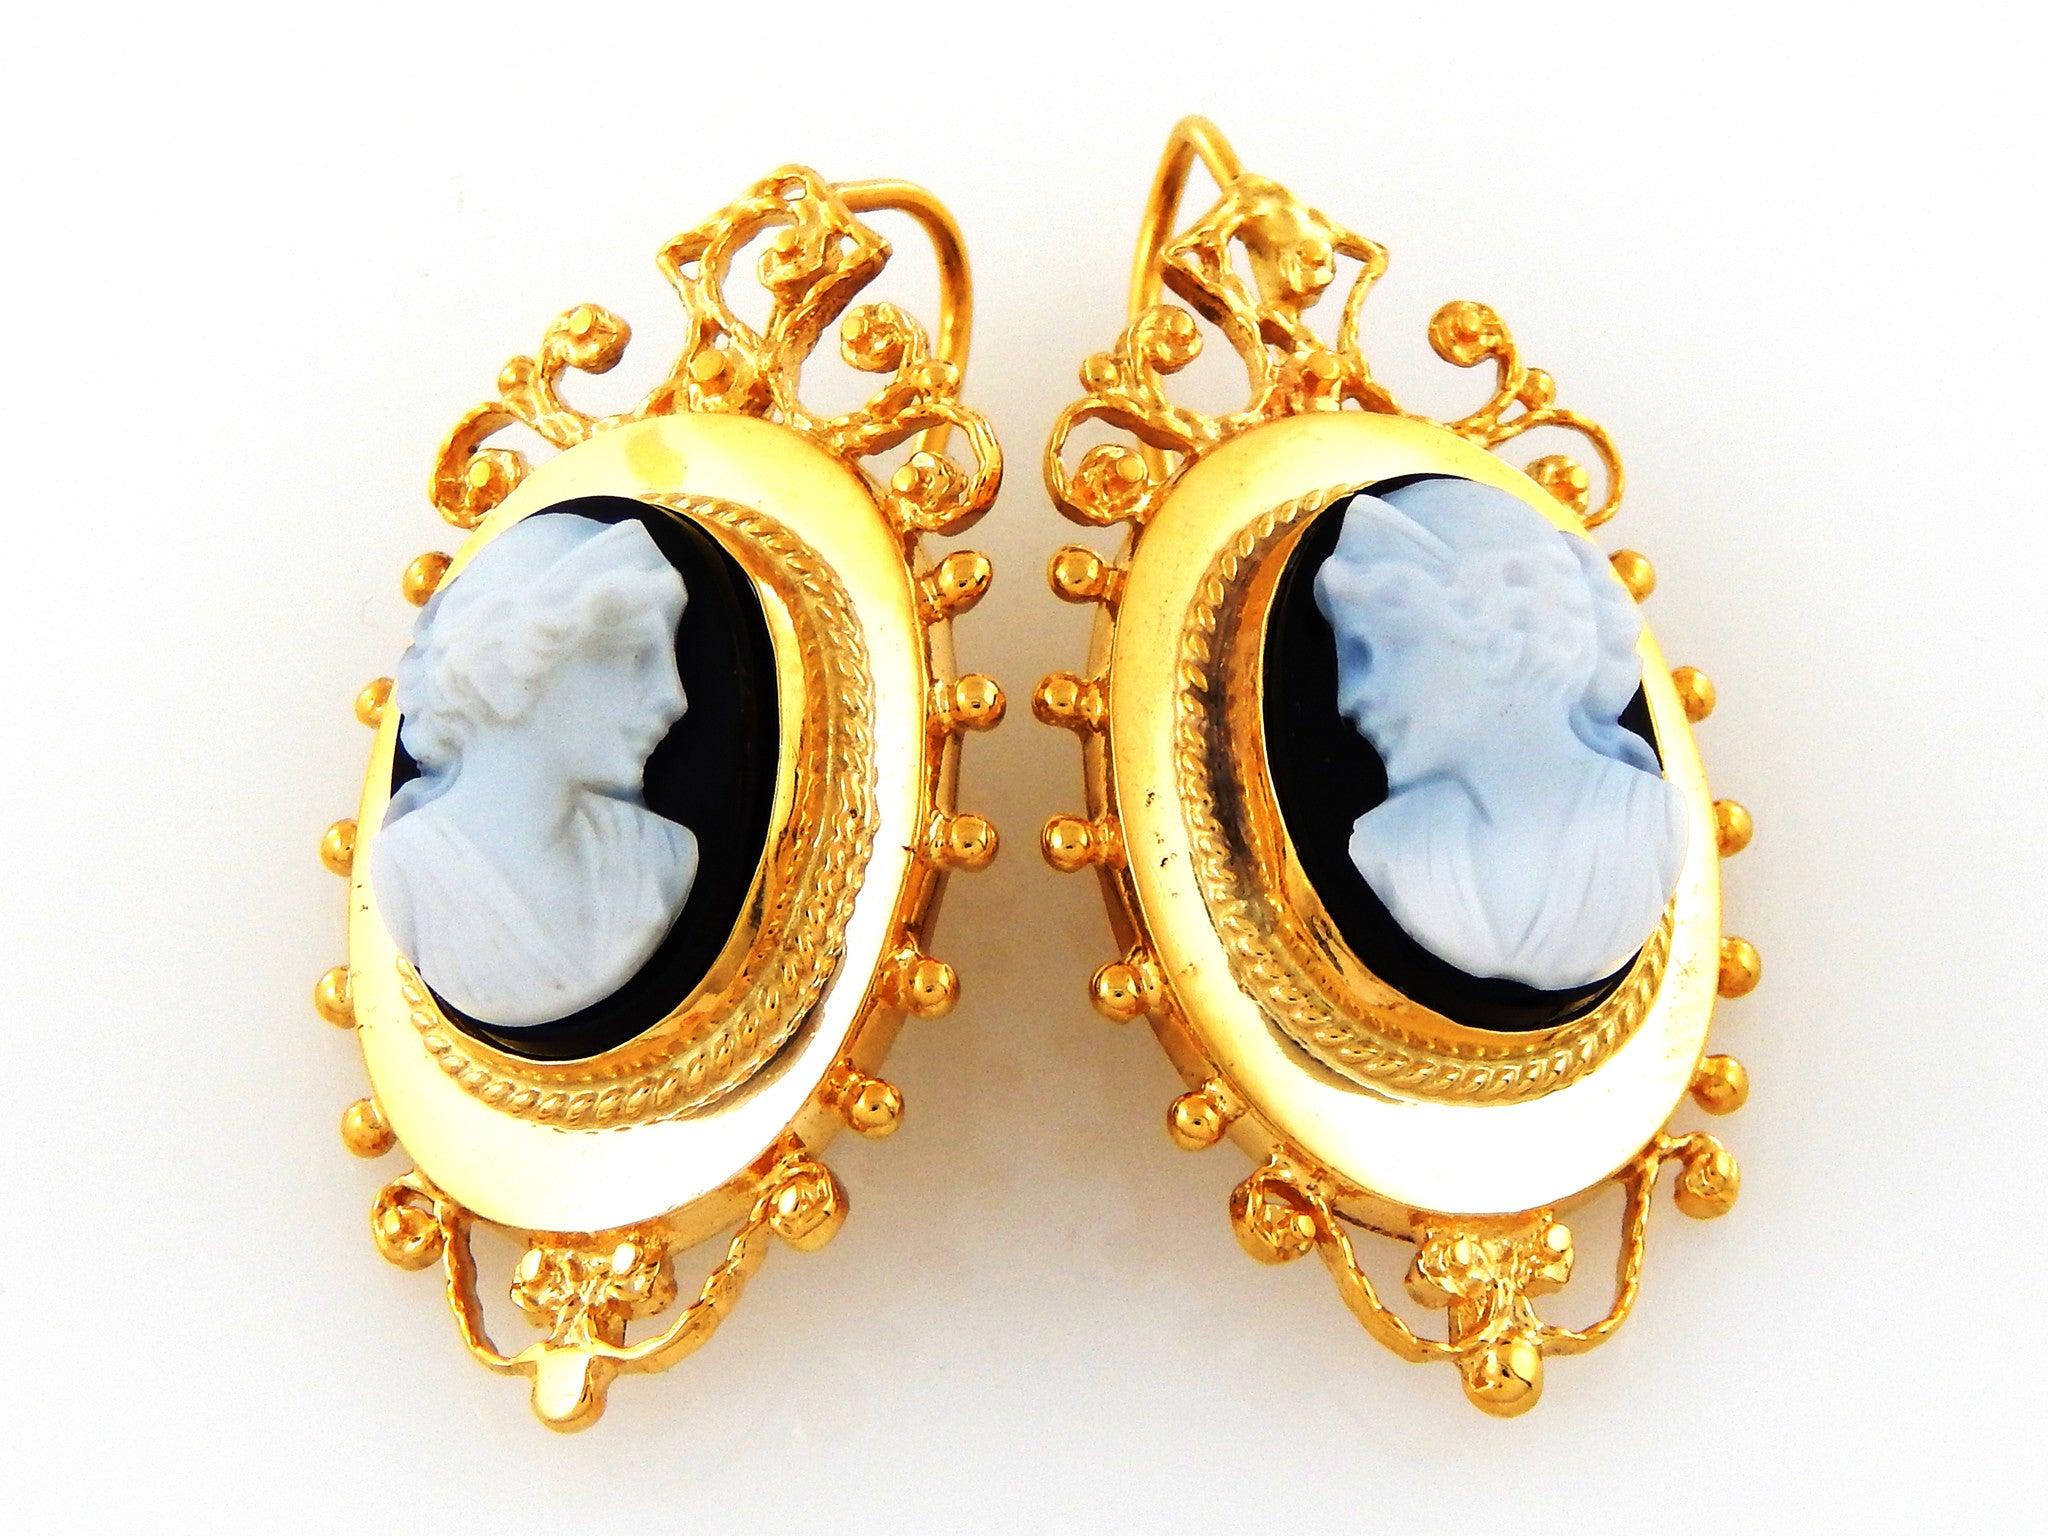 The antique cameo carving of fine 18k solid gold brooch & earrings is just simply astonishing. 
A smooth matte feeling of the cameo sculpture hand-carved on a black onyx is the antique/vintage 1930s collections everyone owned that still remains in